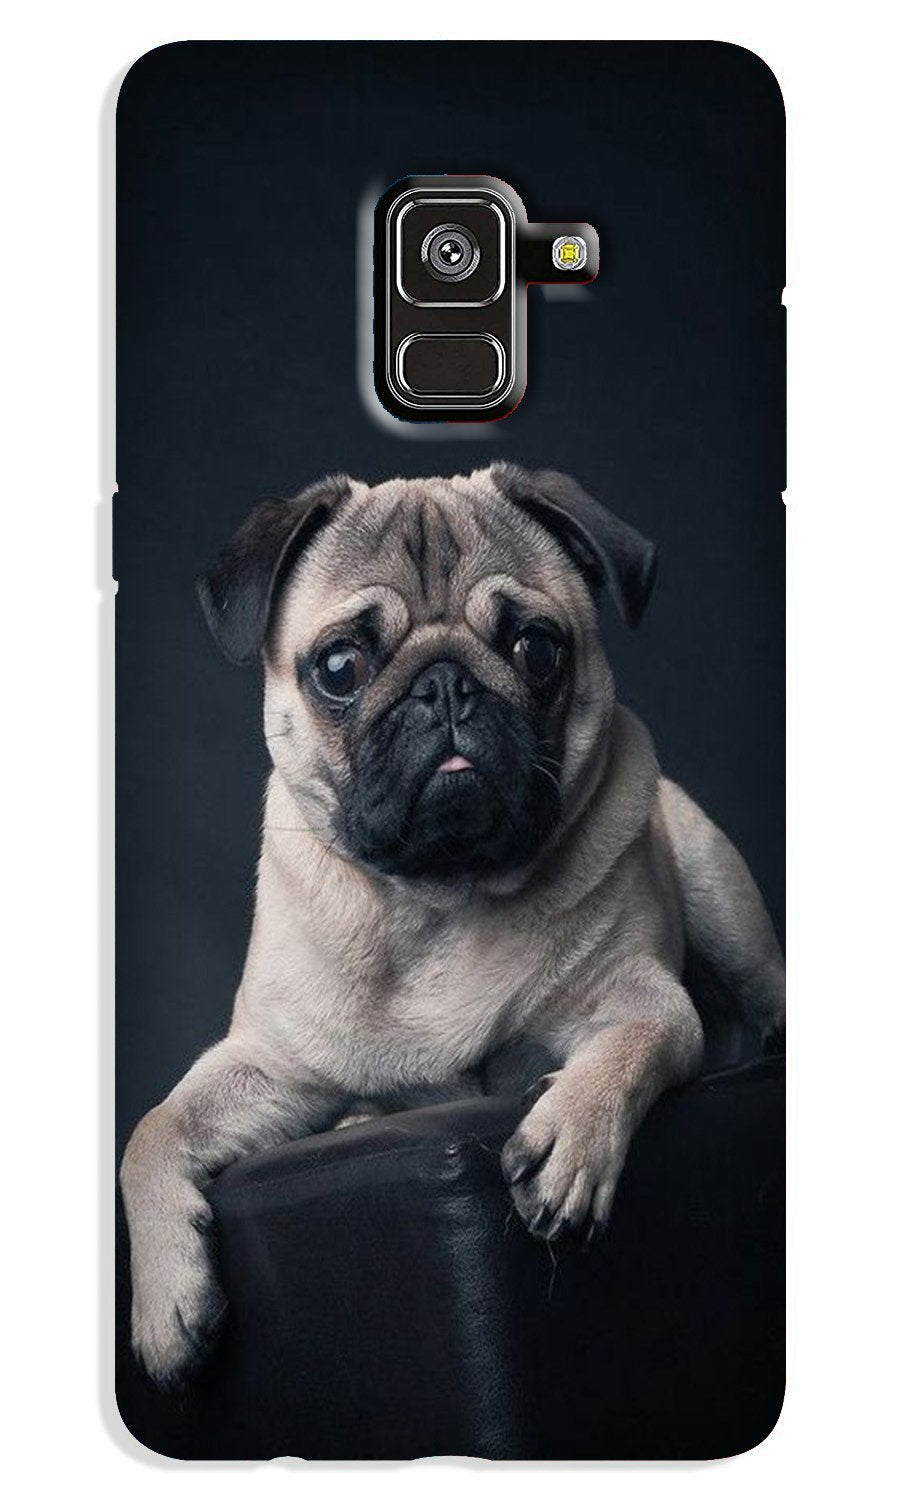 little Puppy Case for Galaxy A8 Plus